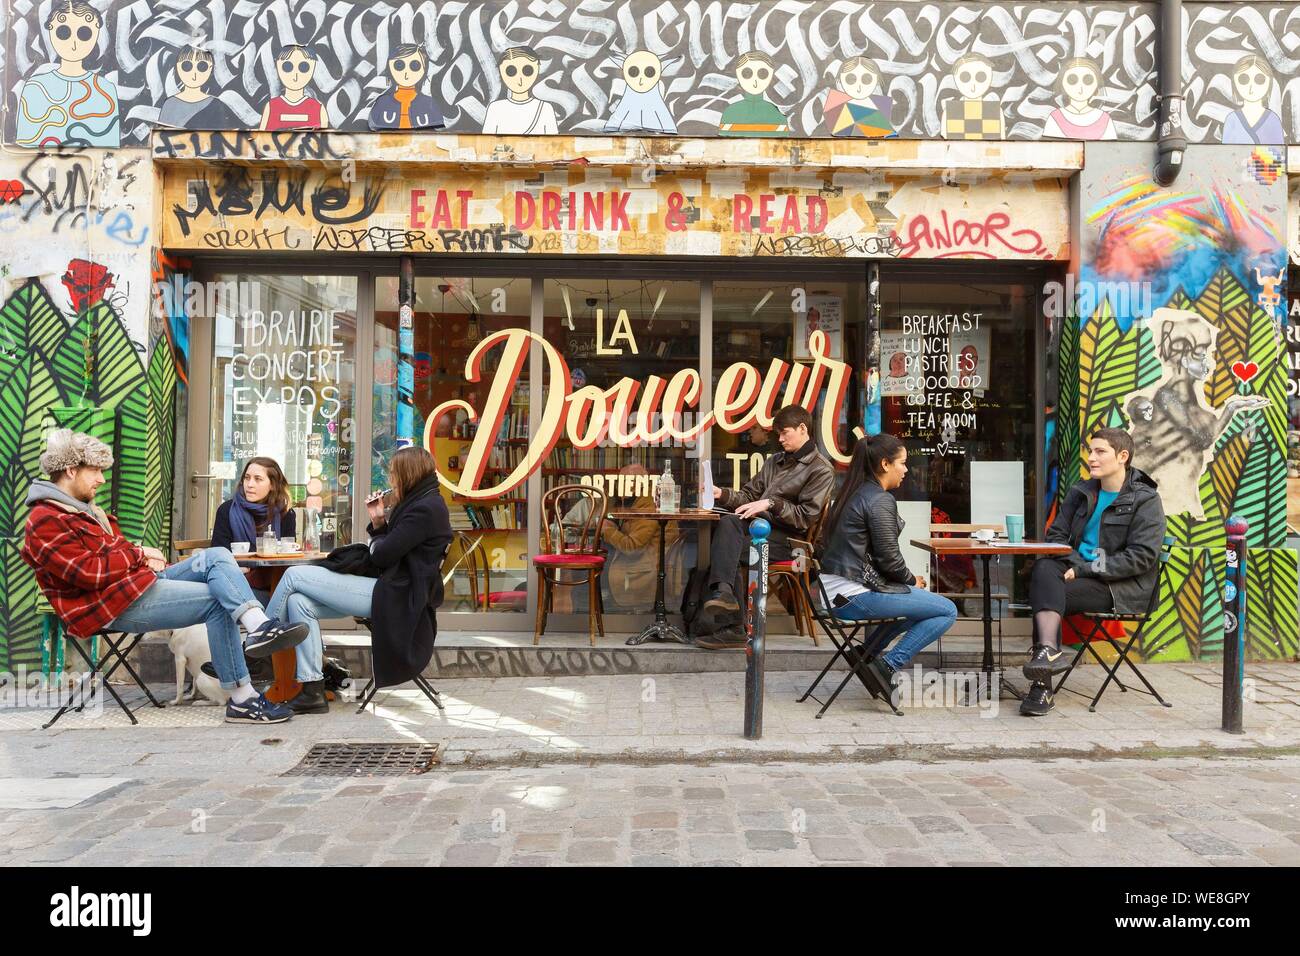 France, Paris, street art, graffitis and murals in Rue Denoyez, the terrace of the Barbouquin, cafe and bookstore Stock Photo